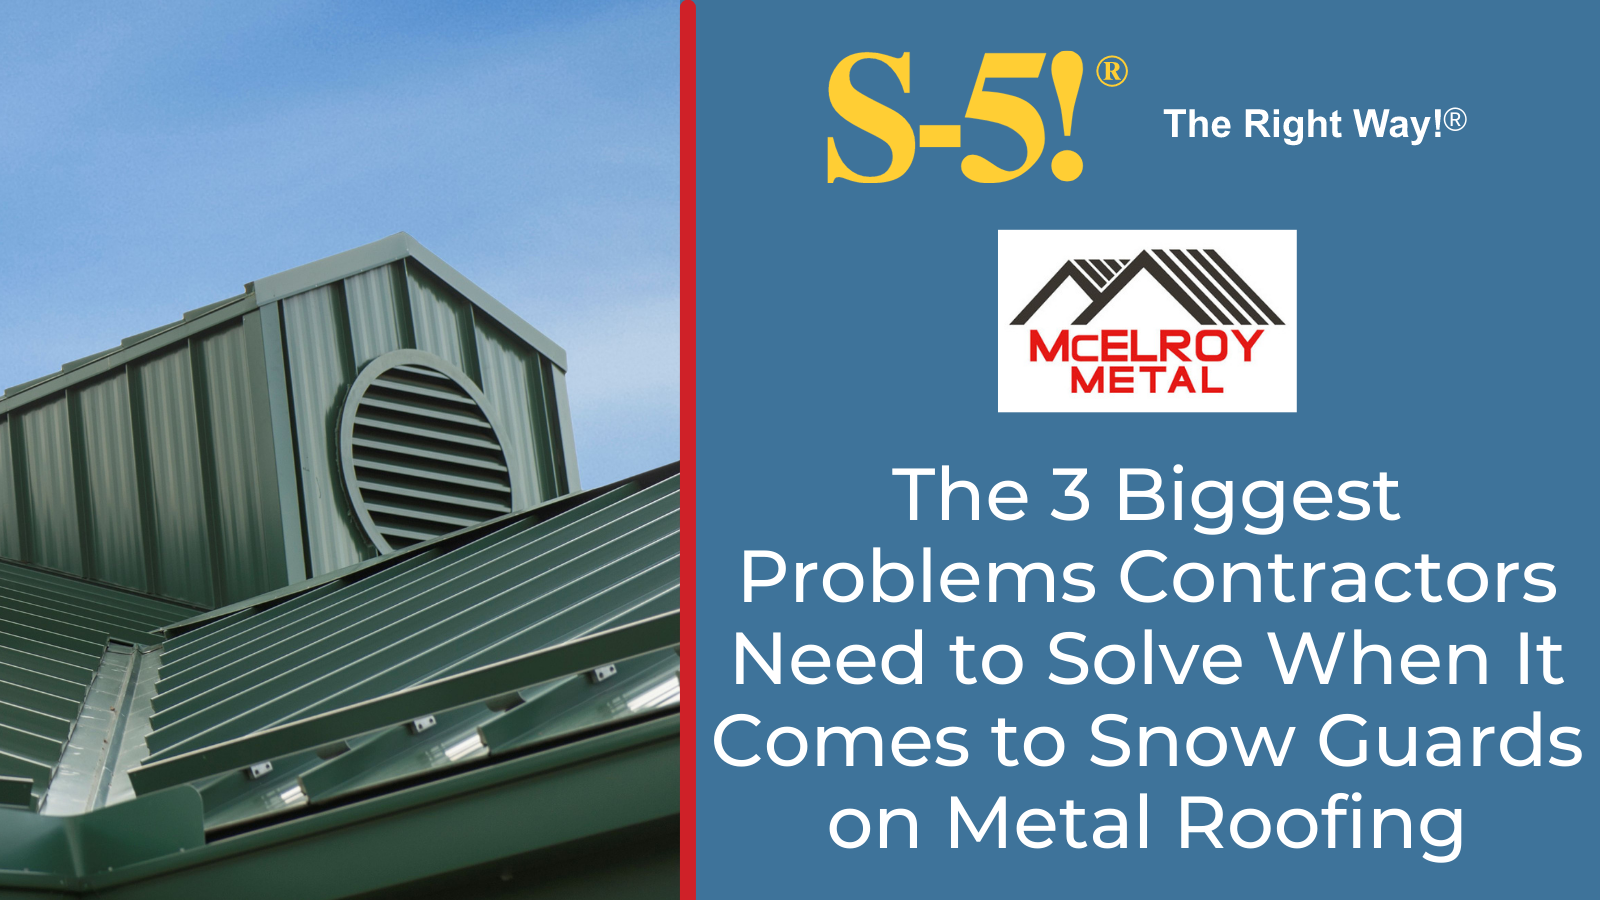 The 3 Biggest Problems Contractors Need to Solve When It Comes to Snow Guards on Metal Roofing